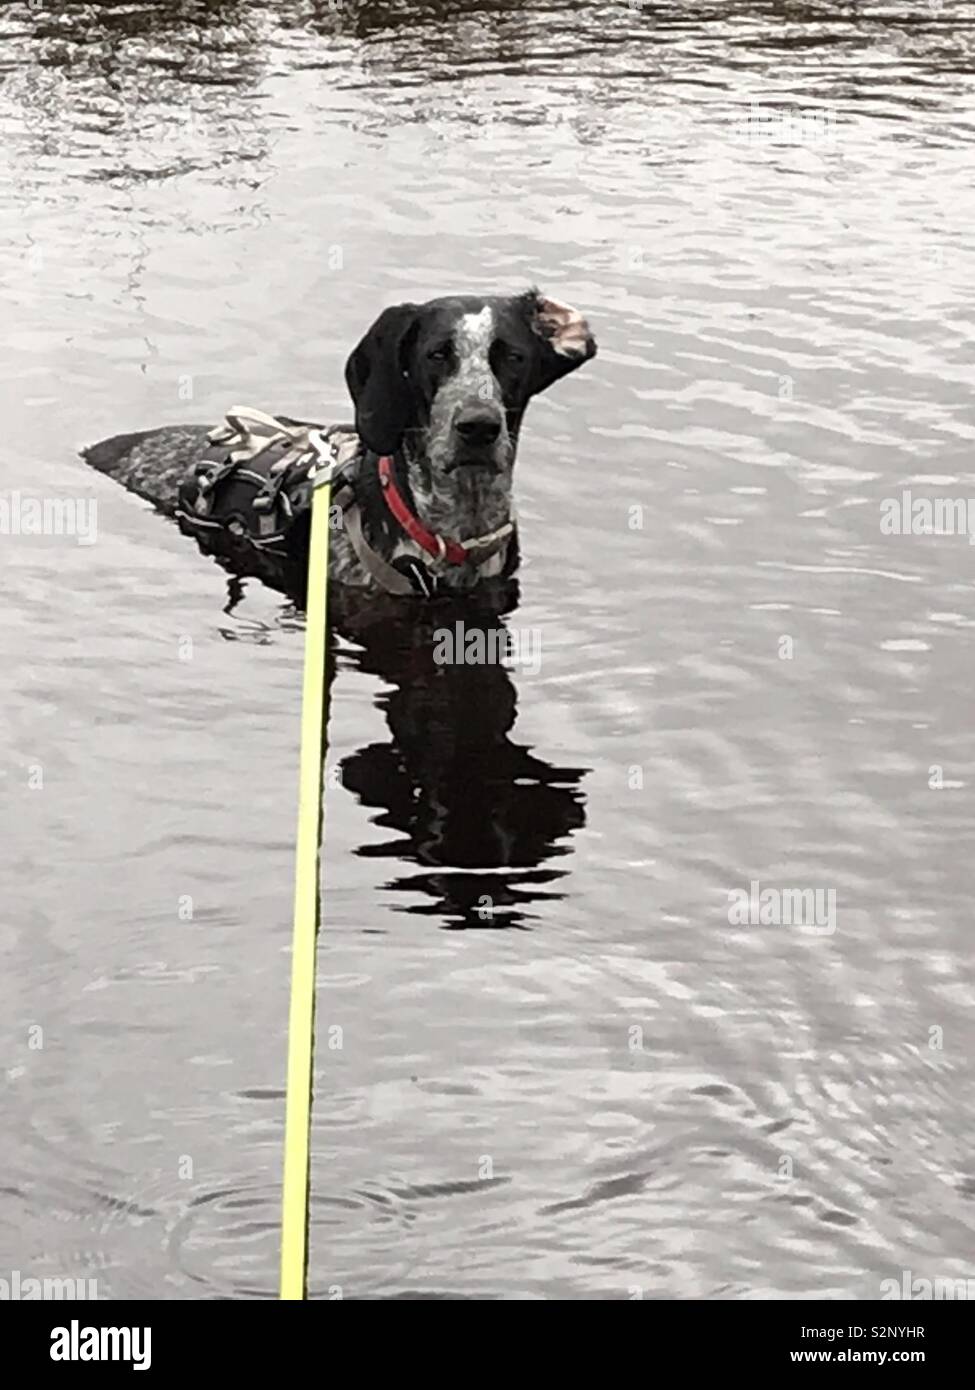 Dog in water Stock Photo